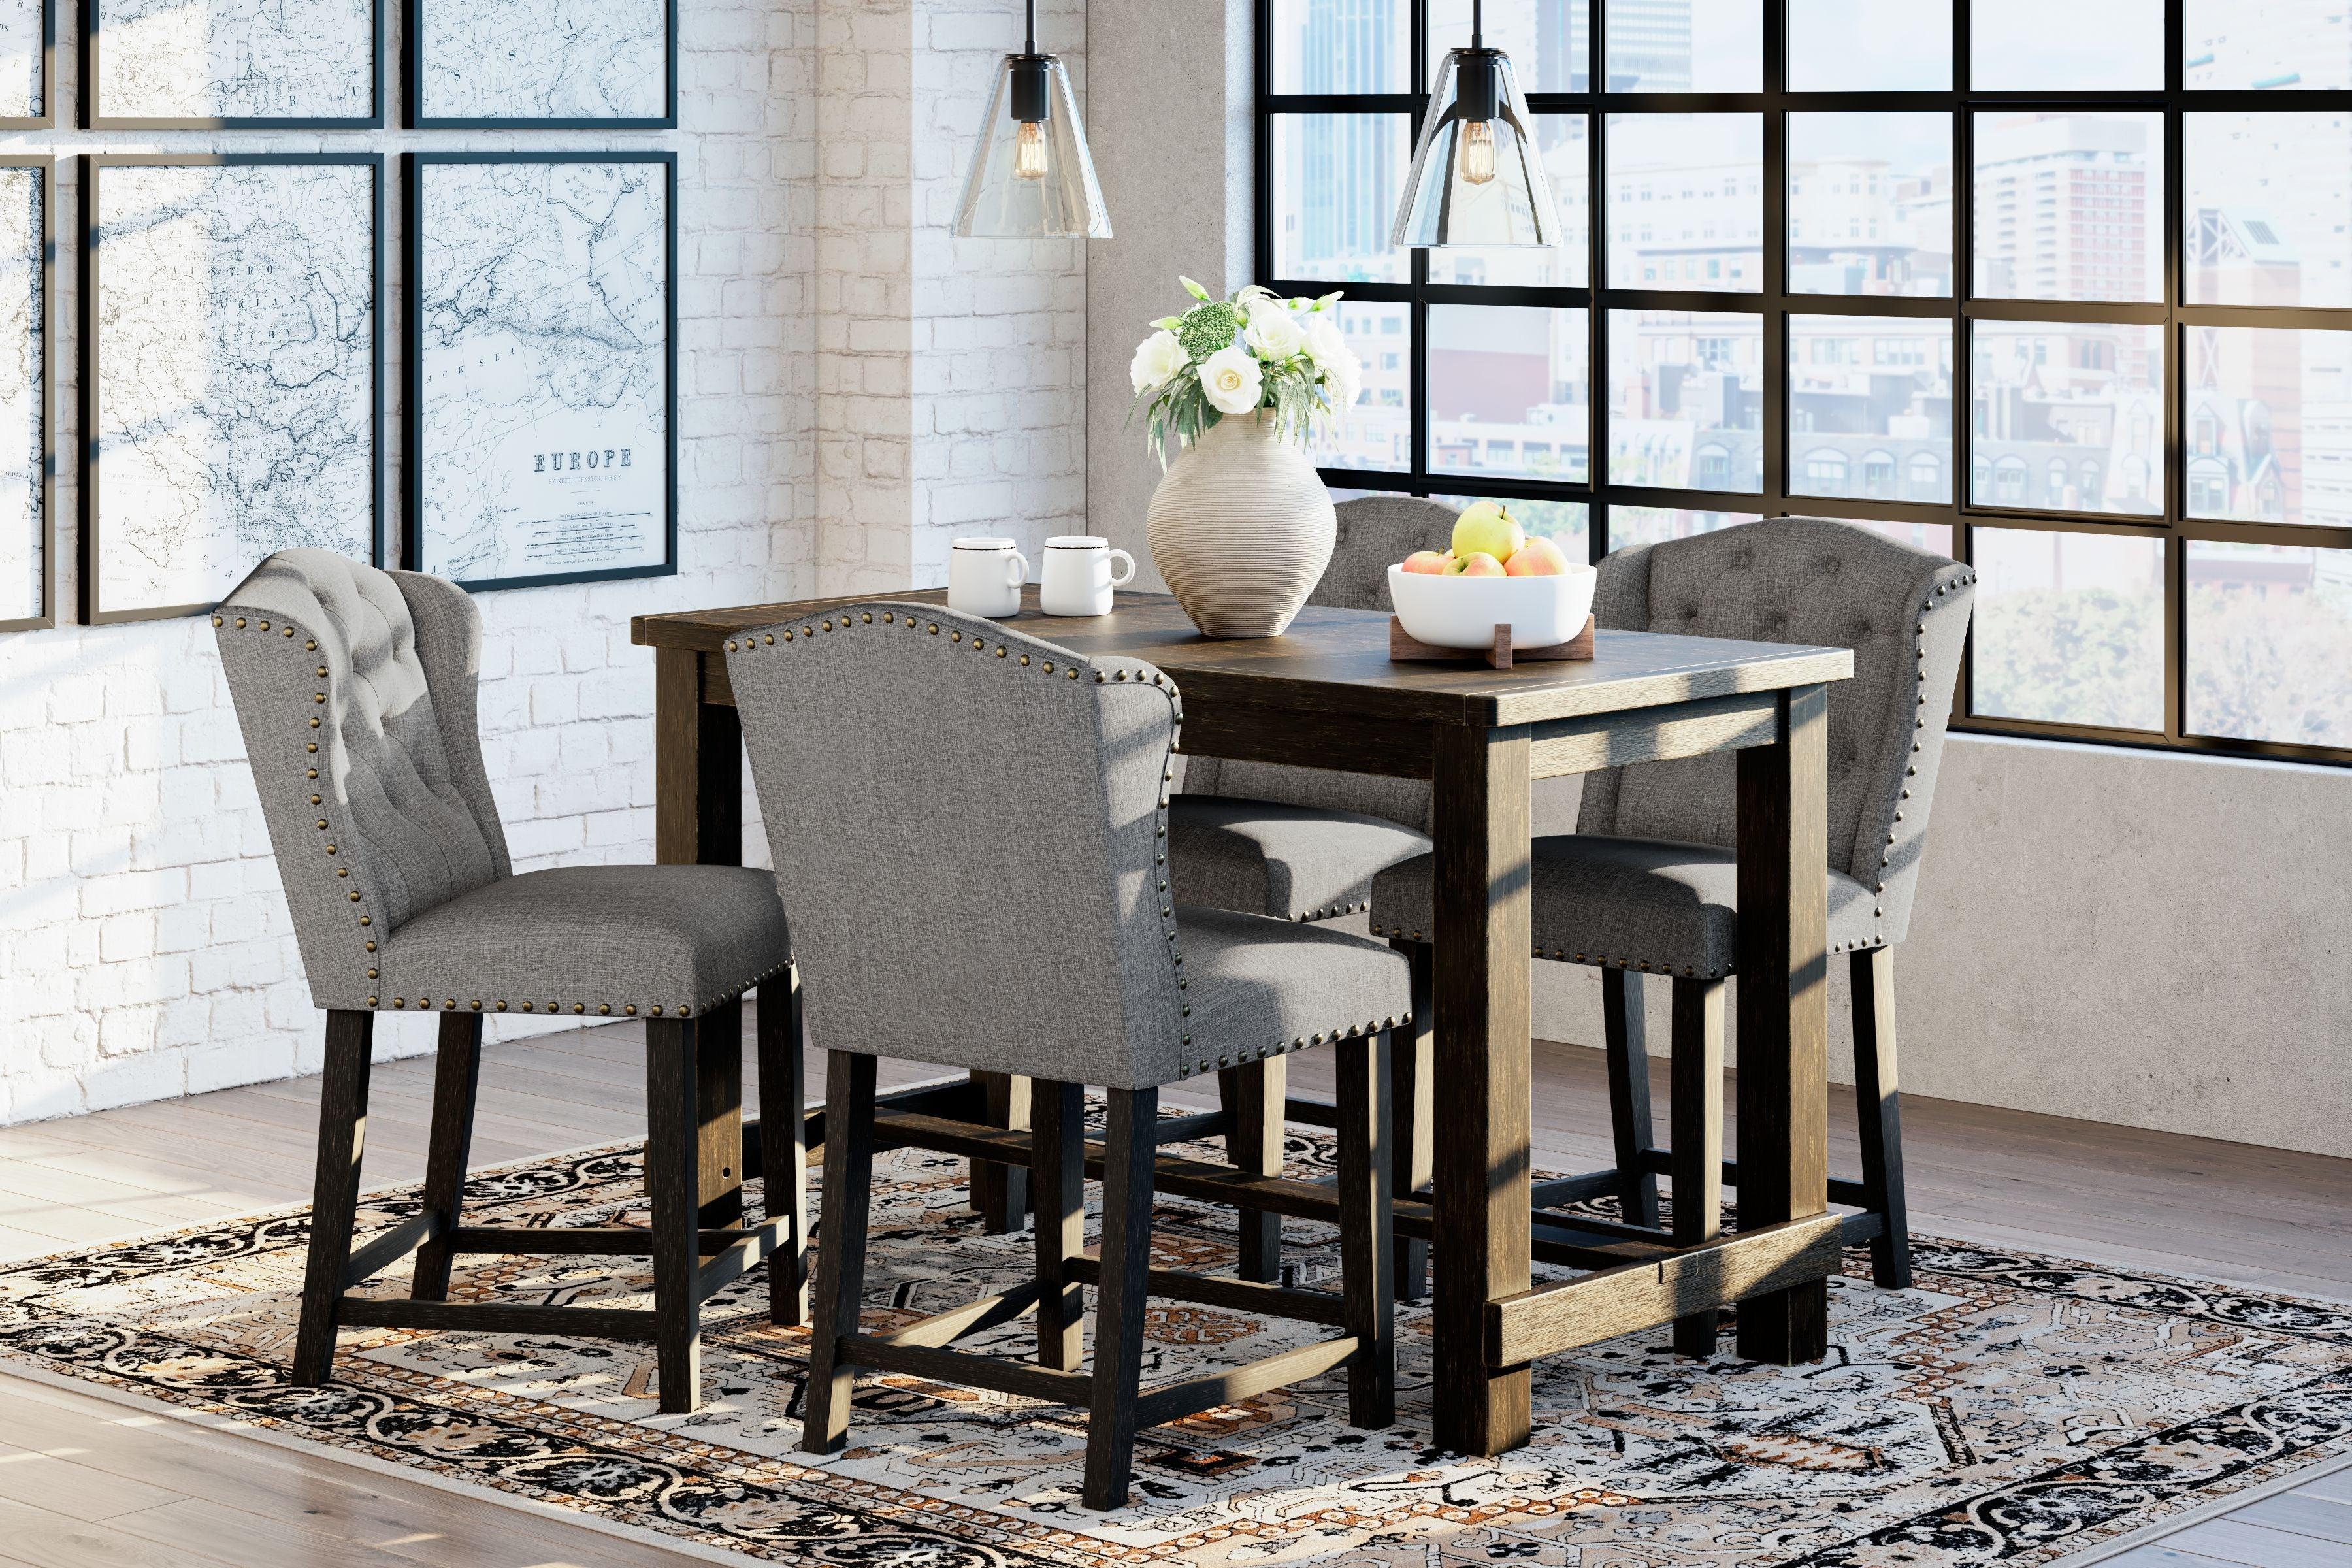 Signature Design by Ashley® - Jeanette - Black / Gray - 5 Pc. - Counter Table, 4 Upholstered Barstools - 5th Avenue Furniture